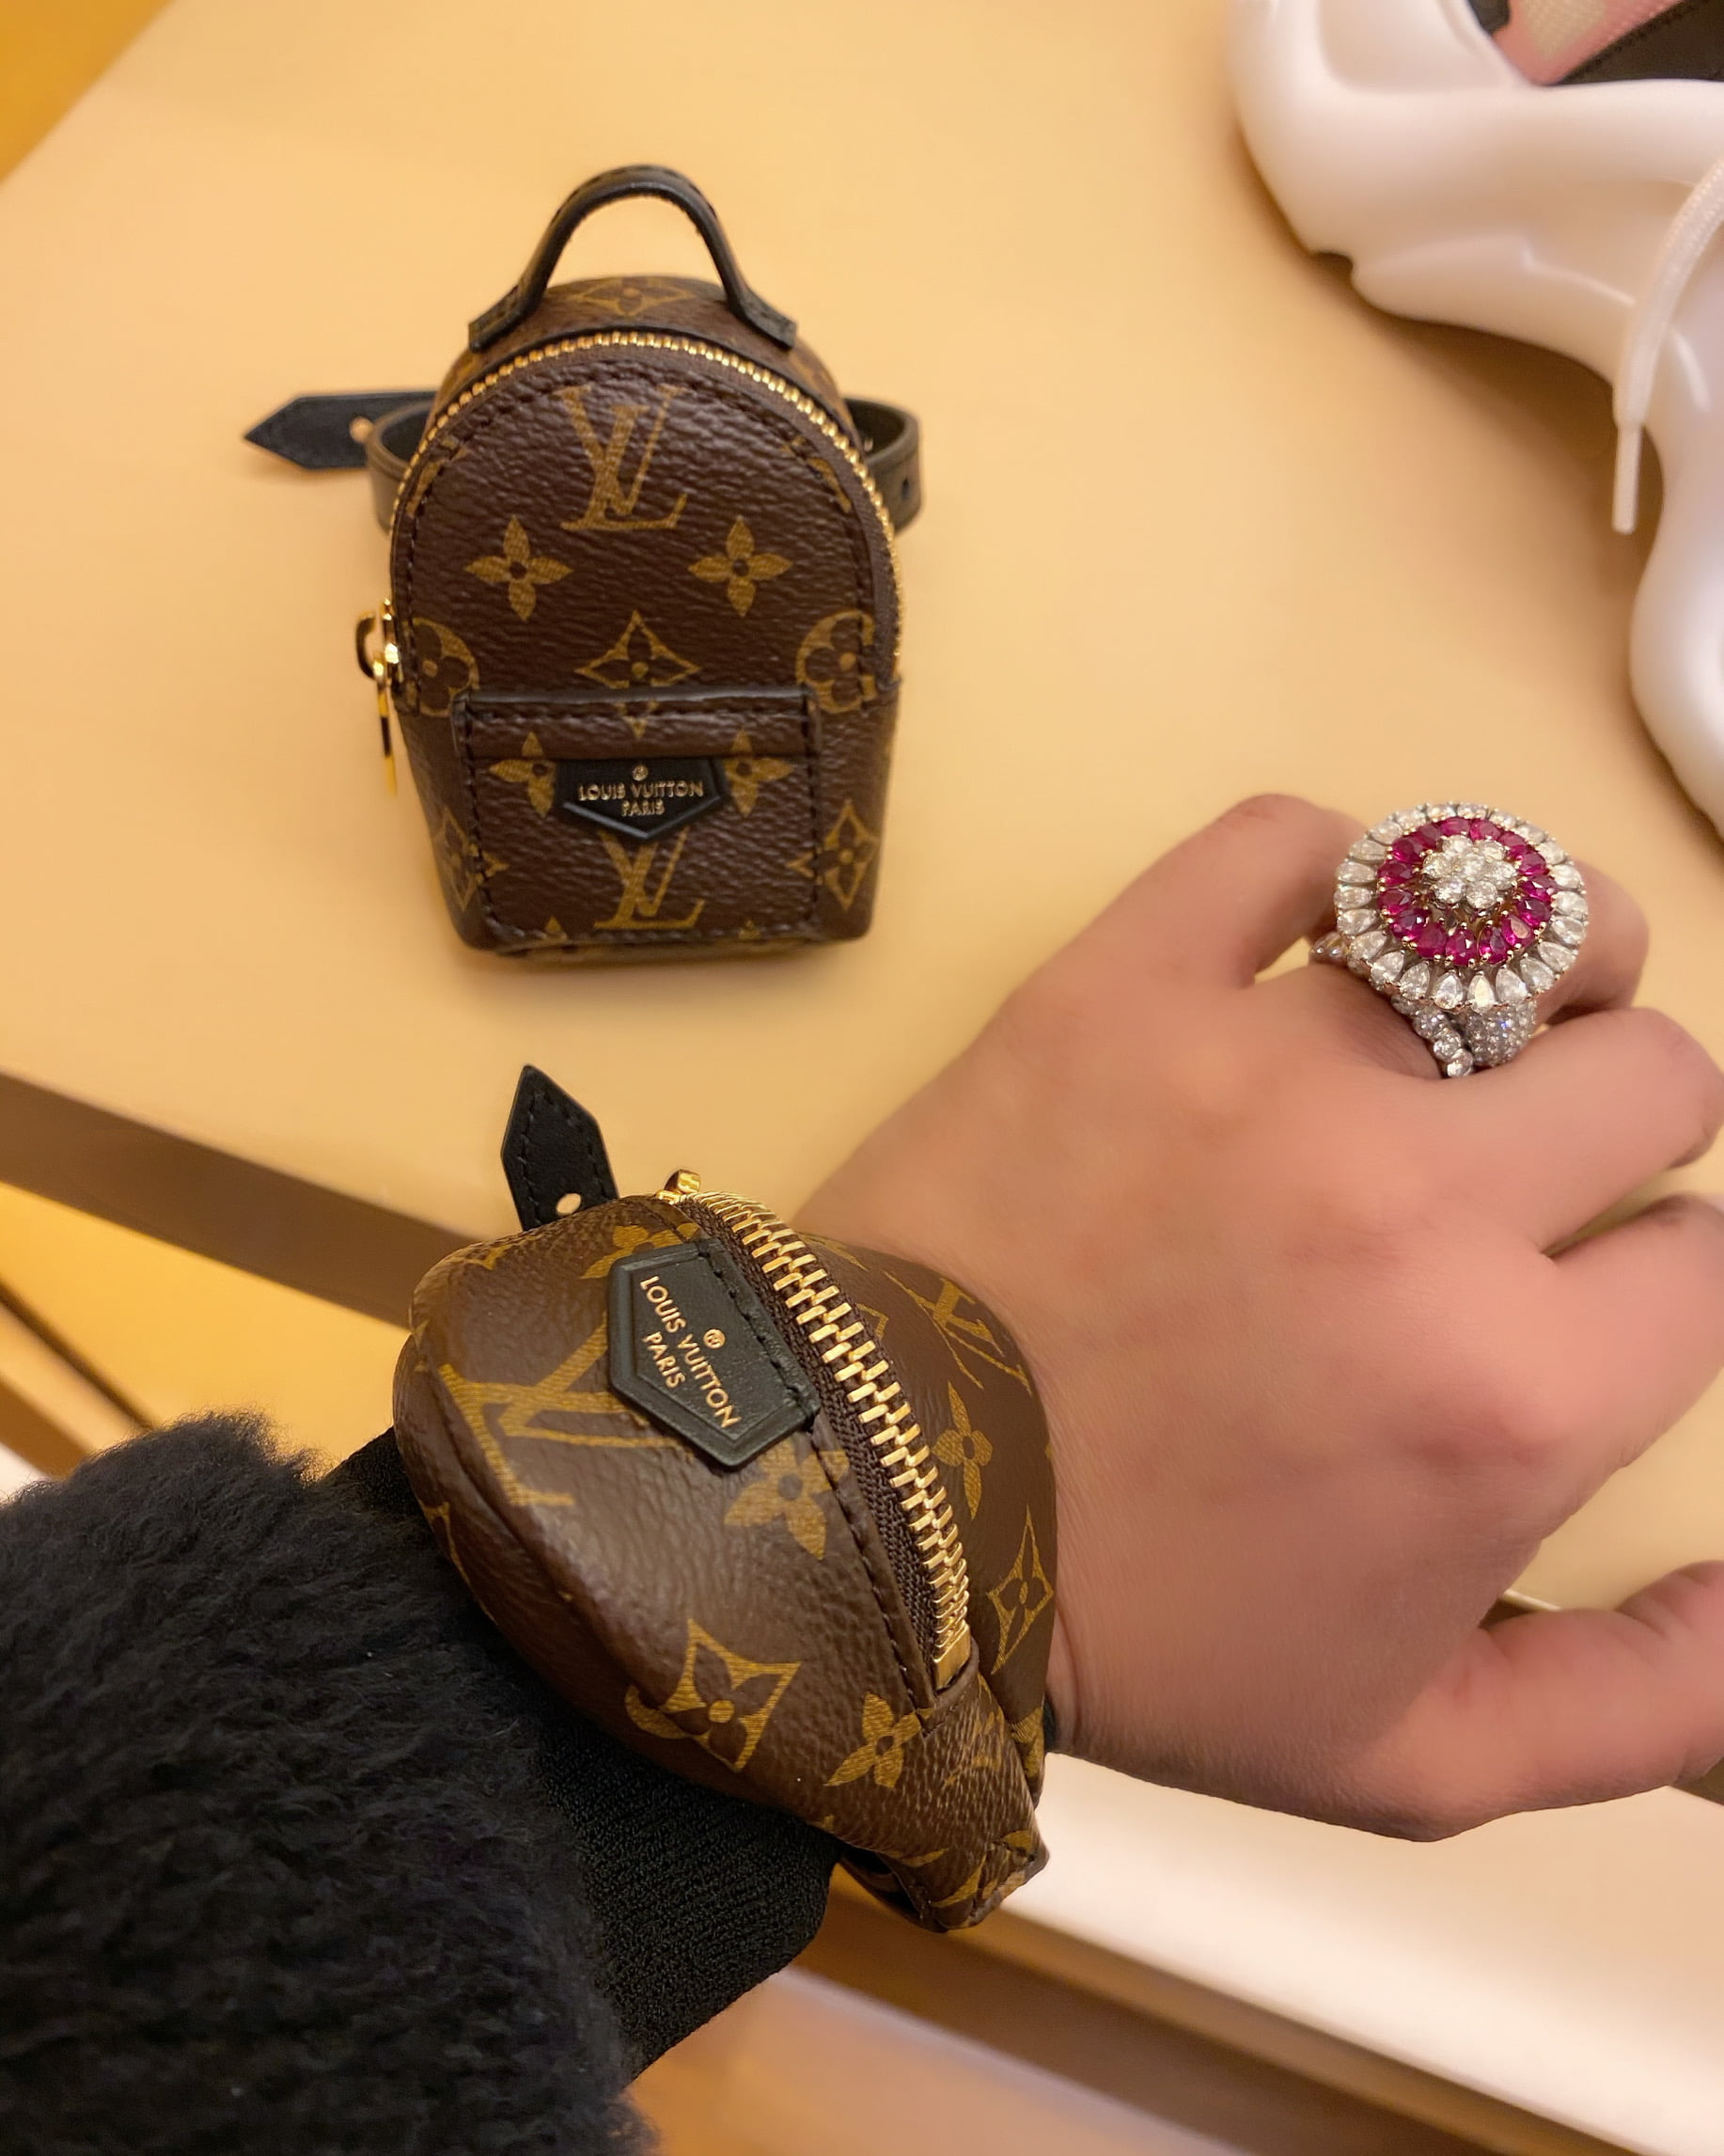 LOUIS VUITTON ENTIRE HANDBAG COLLECTION 2023, Honest REVIEW, LEAST -MOST  USED, LETTING GO